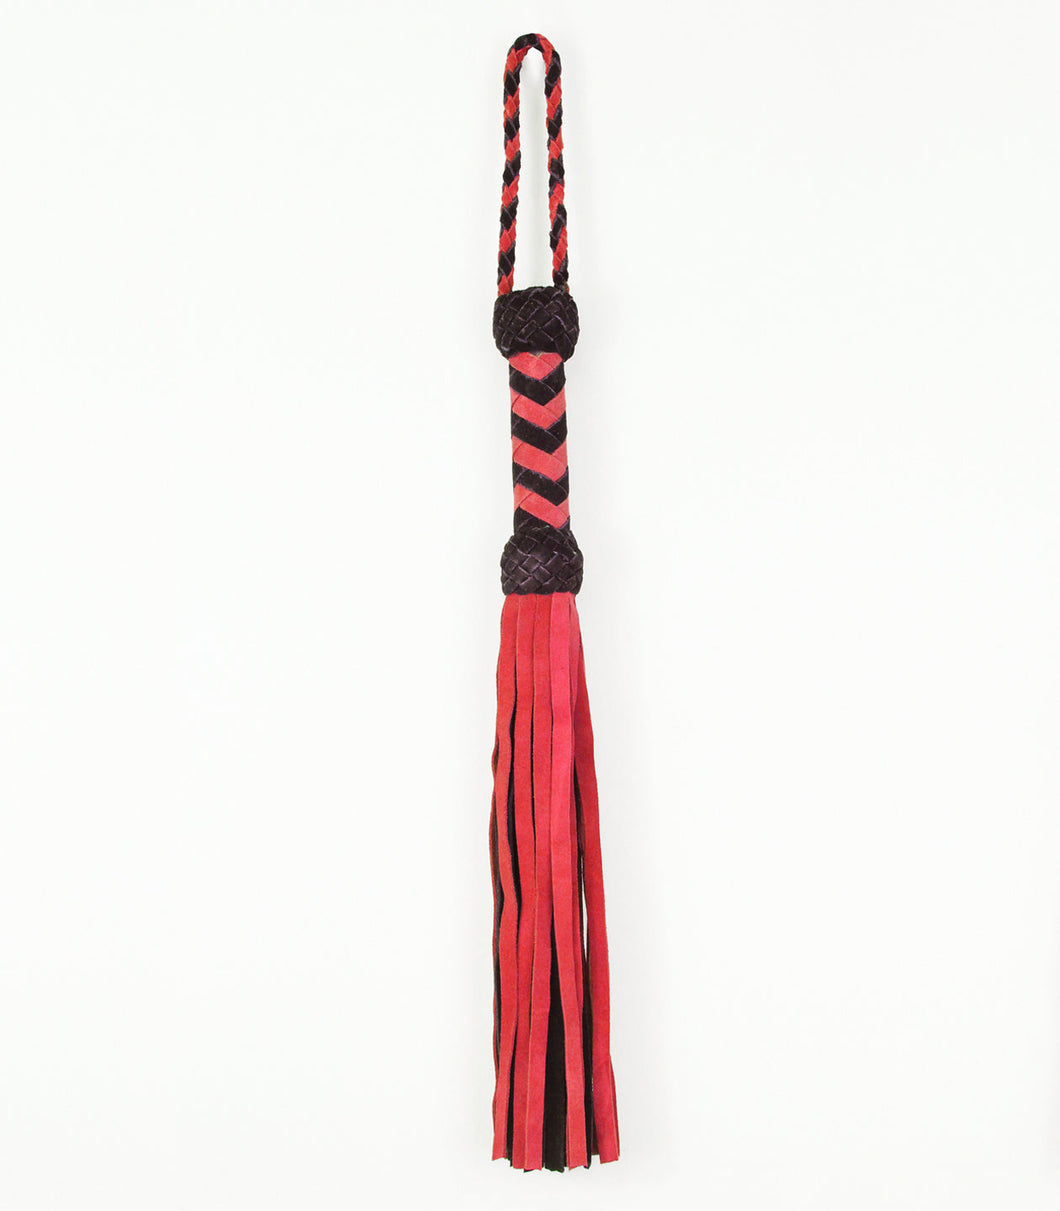 Suede Leather Whip with Turks Head Handle - Black & Red 66cm